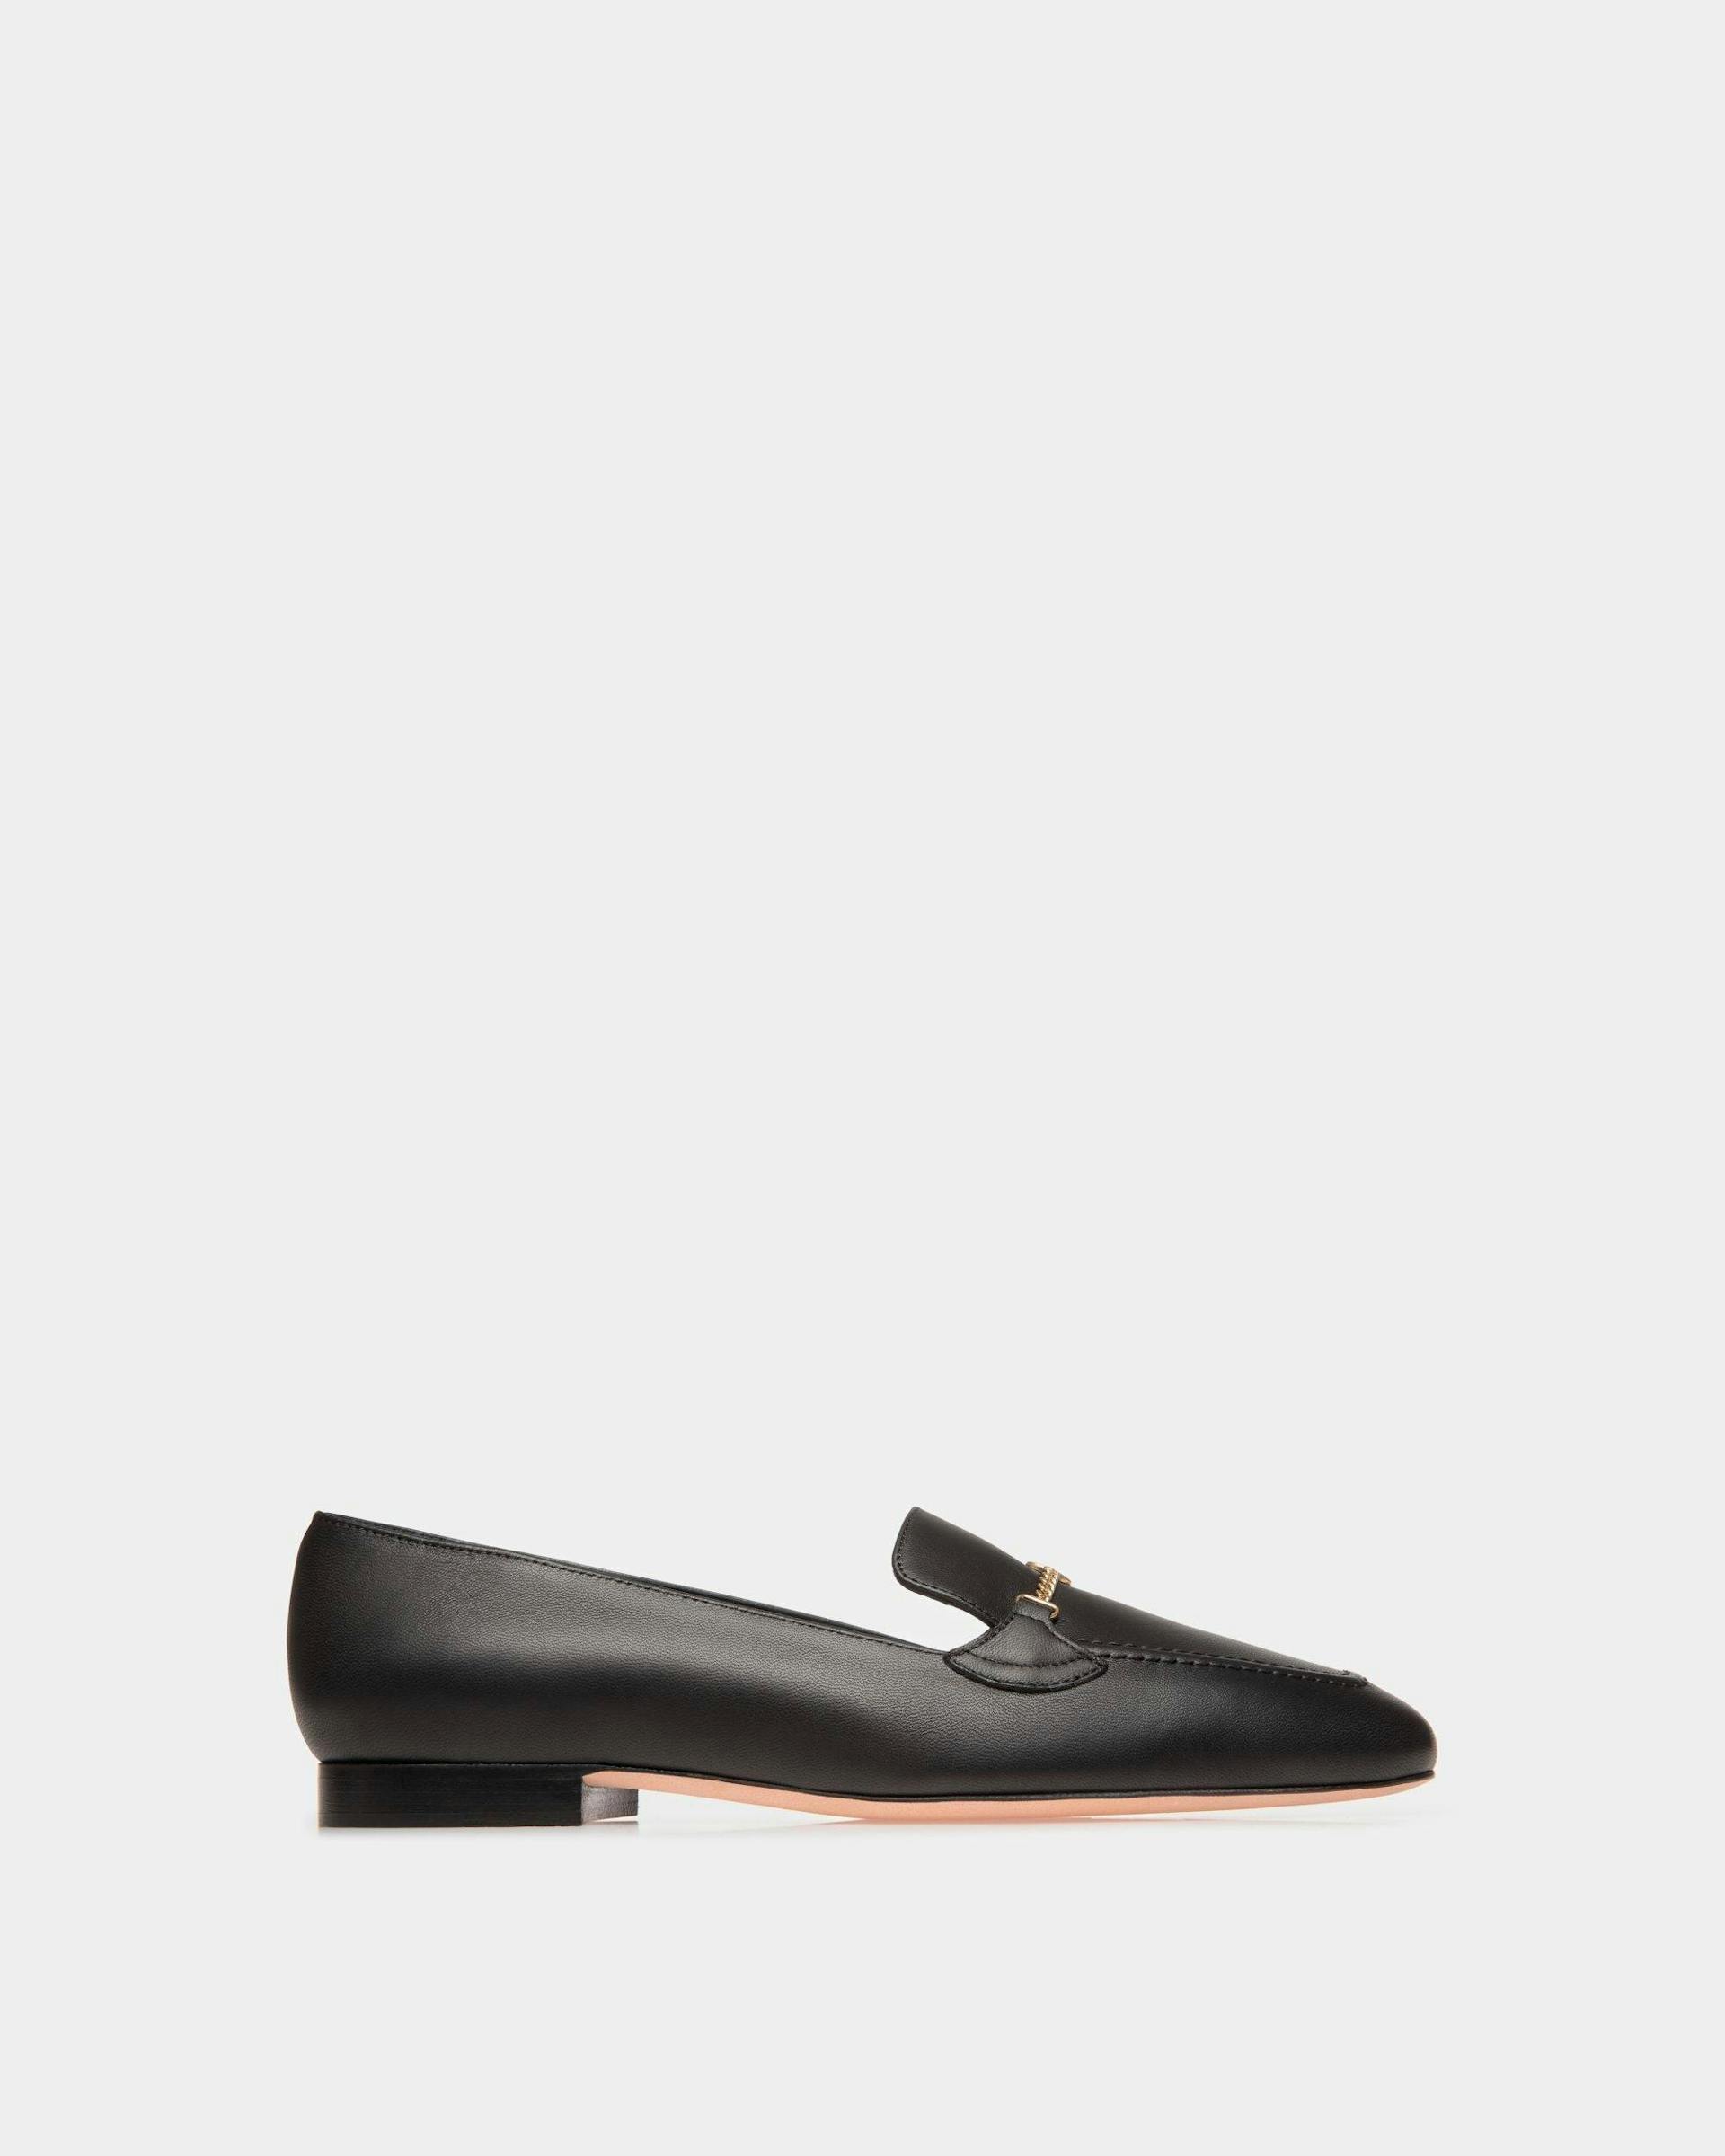 Women's Daily Emblem Loafer in Black Leather | Bally | Still Life Side